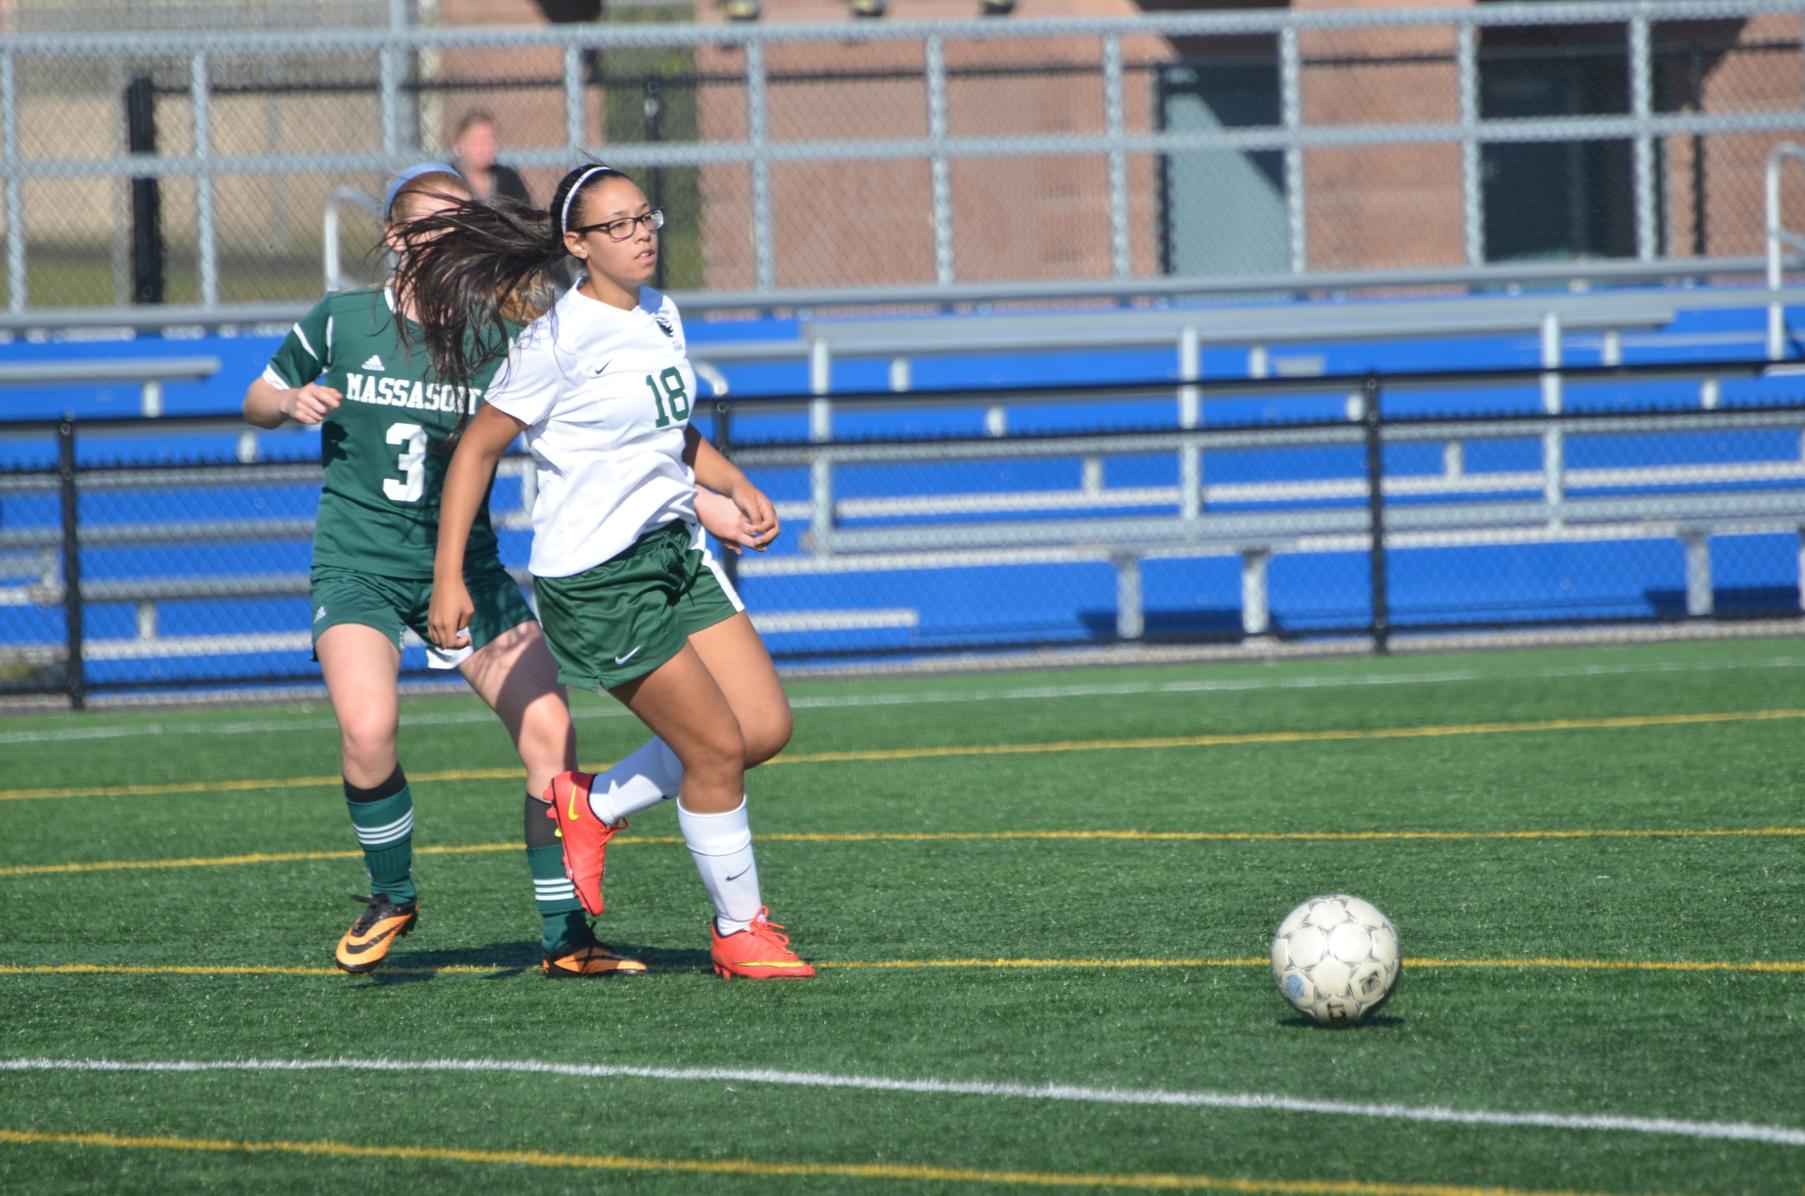 Women's Soccer Outplayed By Talented Holyoke Team By A Score Of 6-1